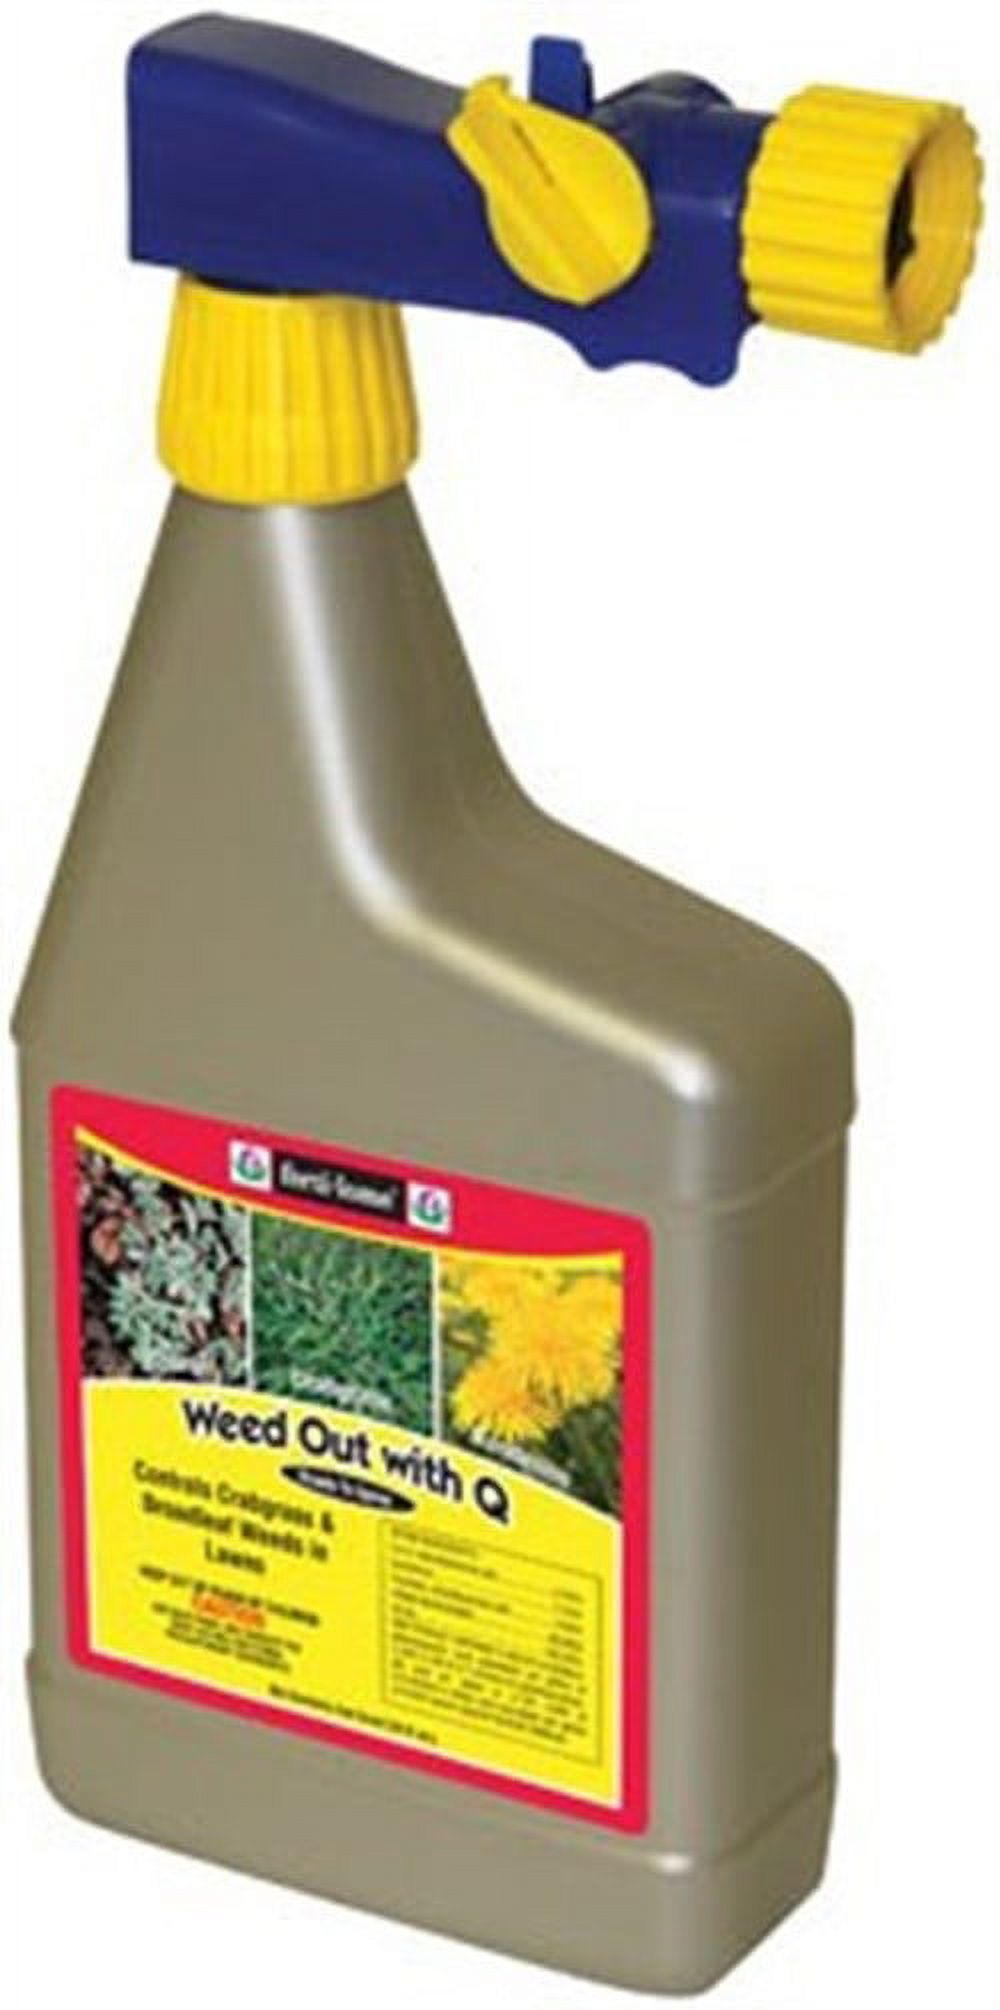 Fertilome Weed-Out with Crabgrass Killer RTS Weed and Crabgrass Killer RTU Liquid 32 oz - image 5 of 5